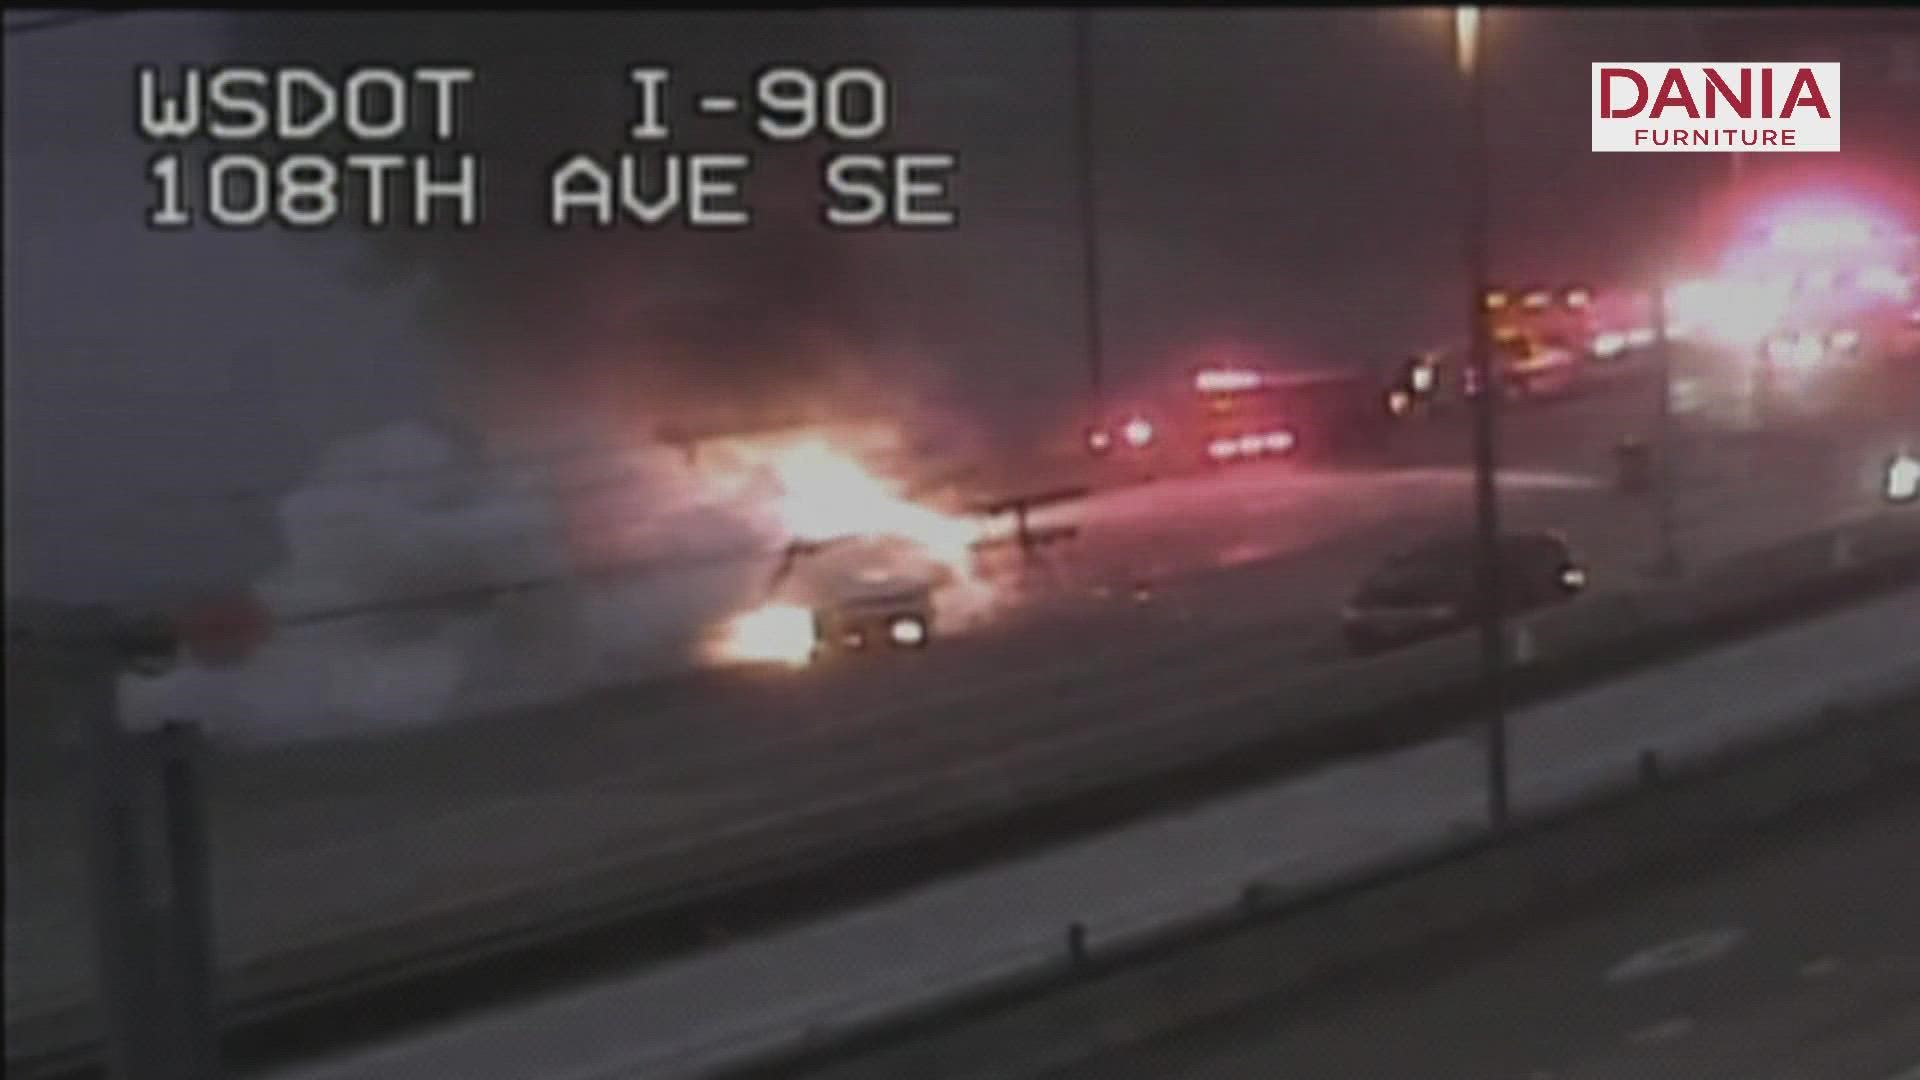 A vehicle on fire has the eastbound lanes of I-90 on Mercer Island closed